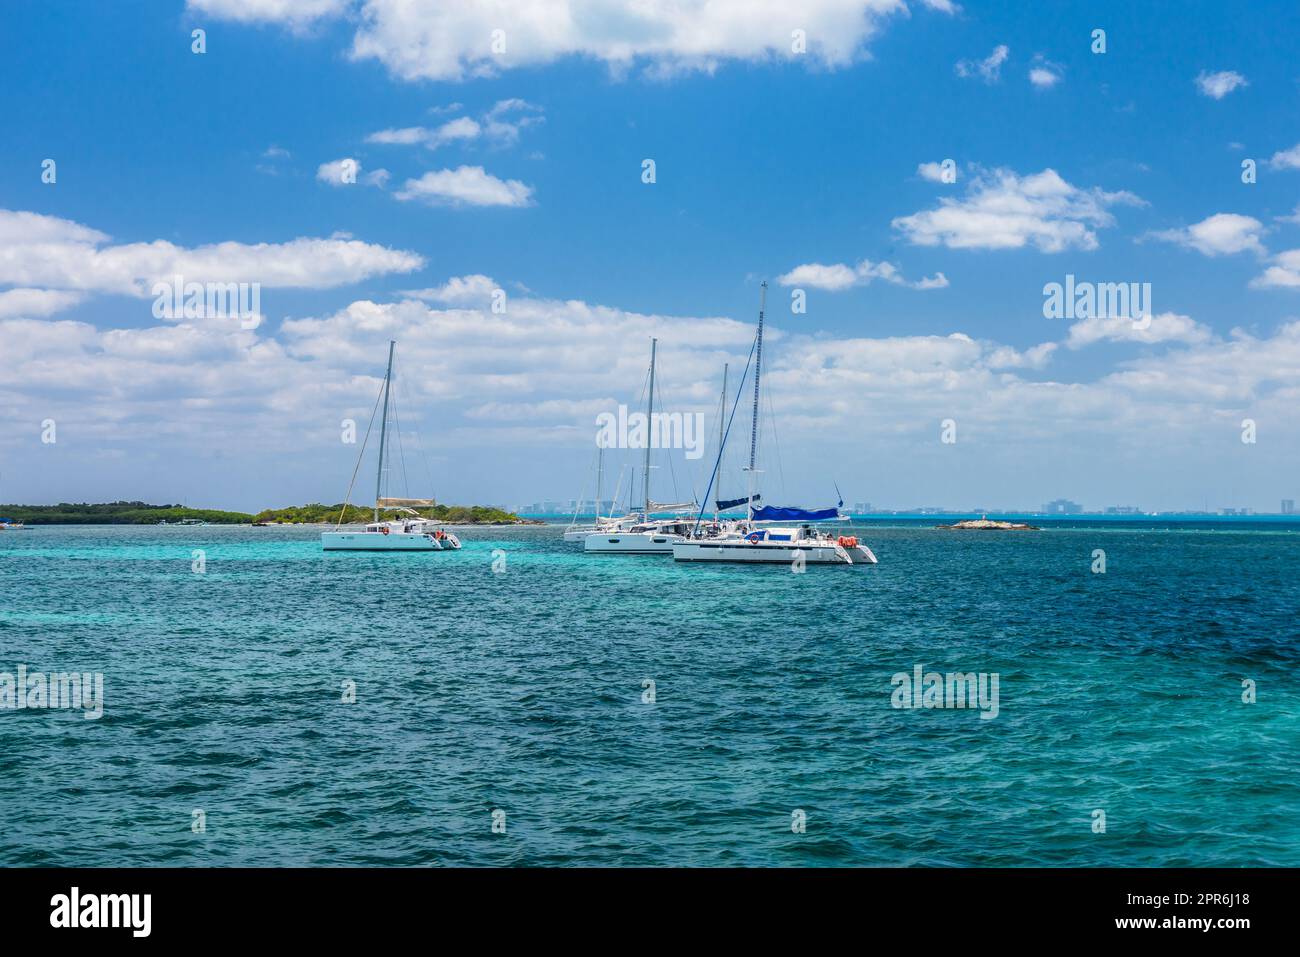 Sailboat and turquoise clear water, blue water, Caribbean ocean, Isla Mujeres, Cancun, Yucatan, Mexico Stock Photo